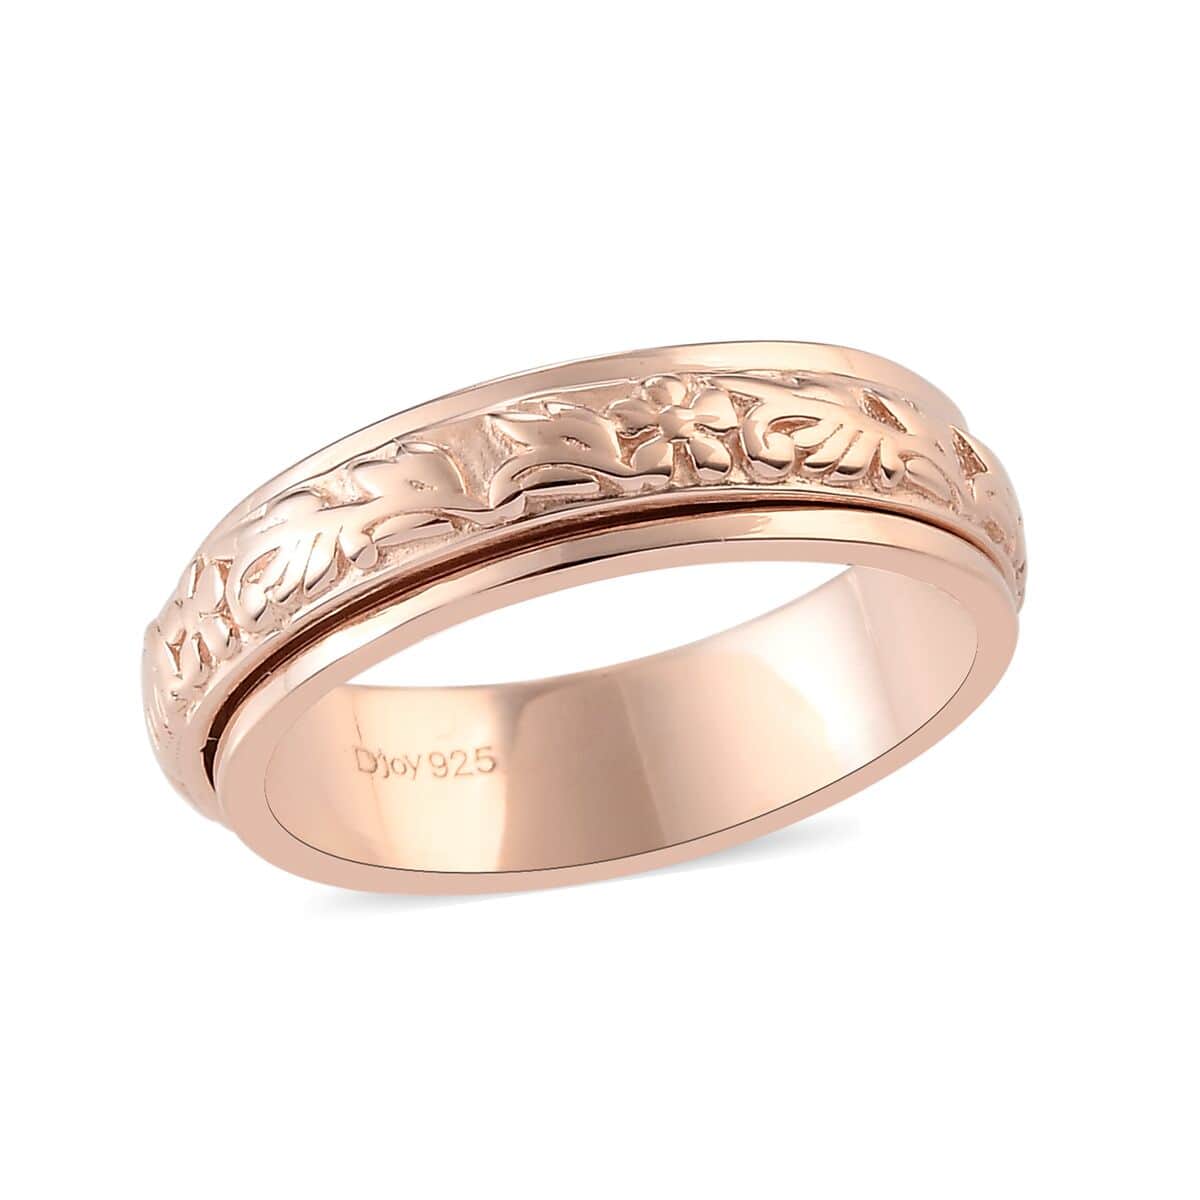 Floral Fidget Spinner Ring for Anxiety in Vermeil Rose Gold Over Sterling Silver, Anxiety Ring for Women, Fidget Rings for Anxiety, Promise Rings 4.50 Grams (Size 5.00) image number 0